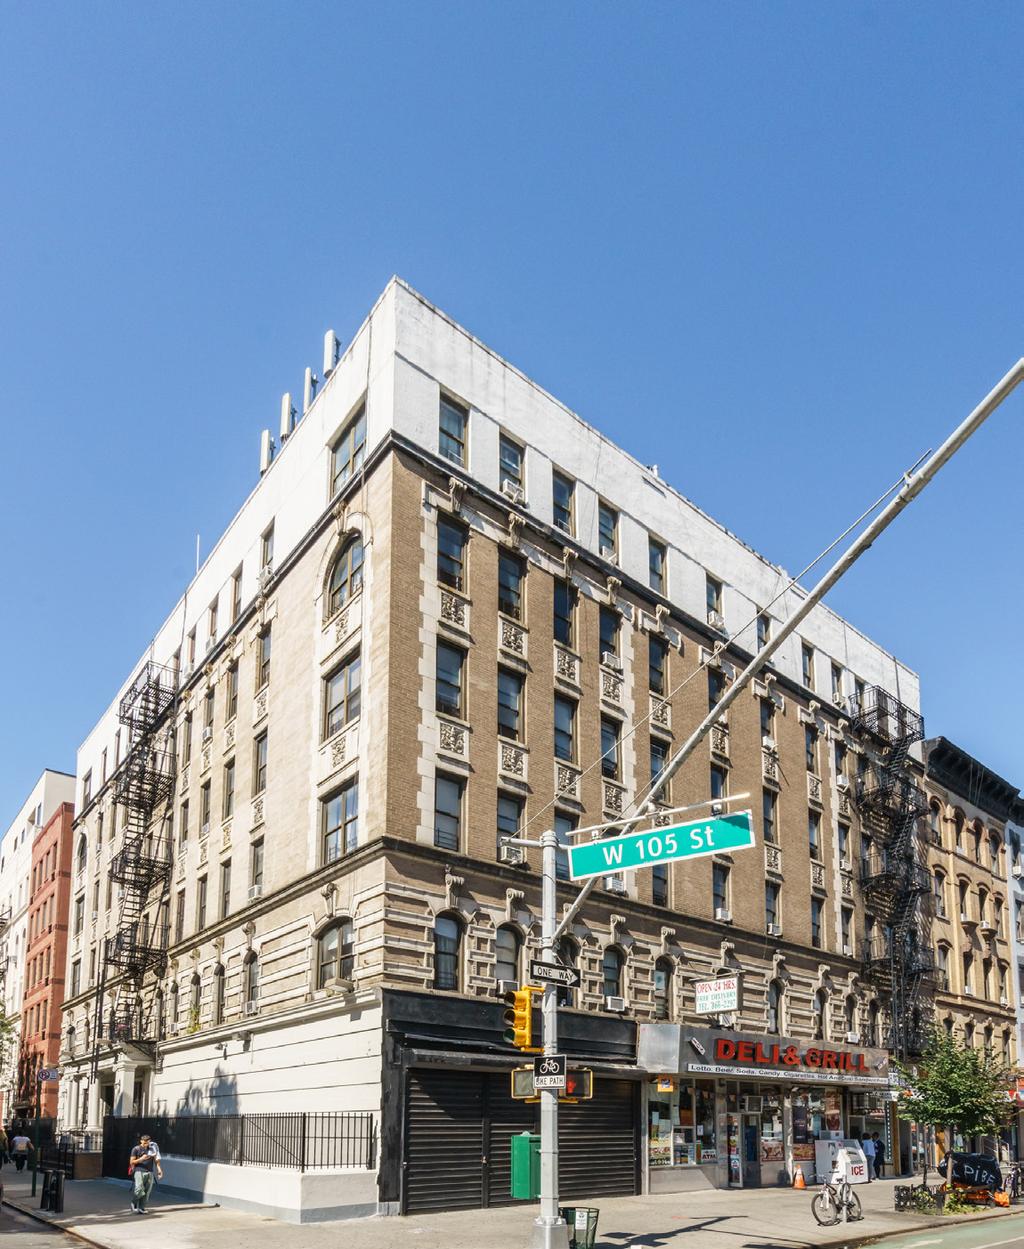 The property is built 75 feet by 88 feet on the first through sixth floors and sits on a 75.92 foot by 100-foot lot with approximately 35,290 gross square feet.